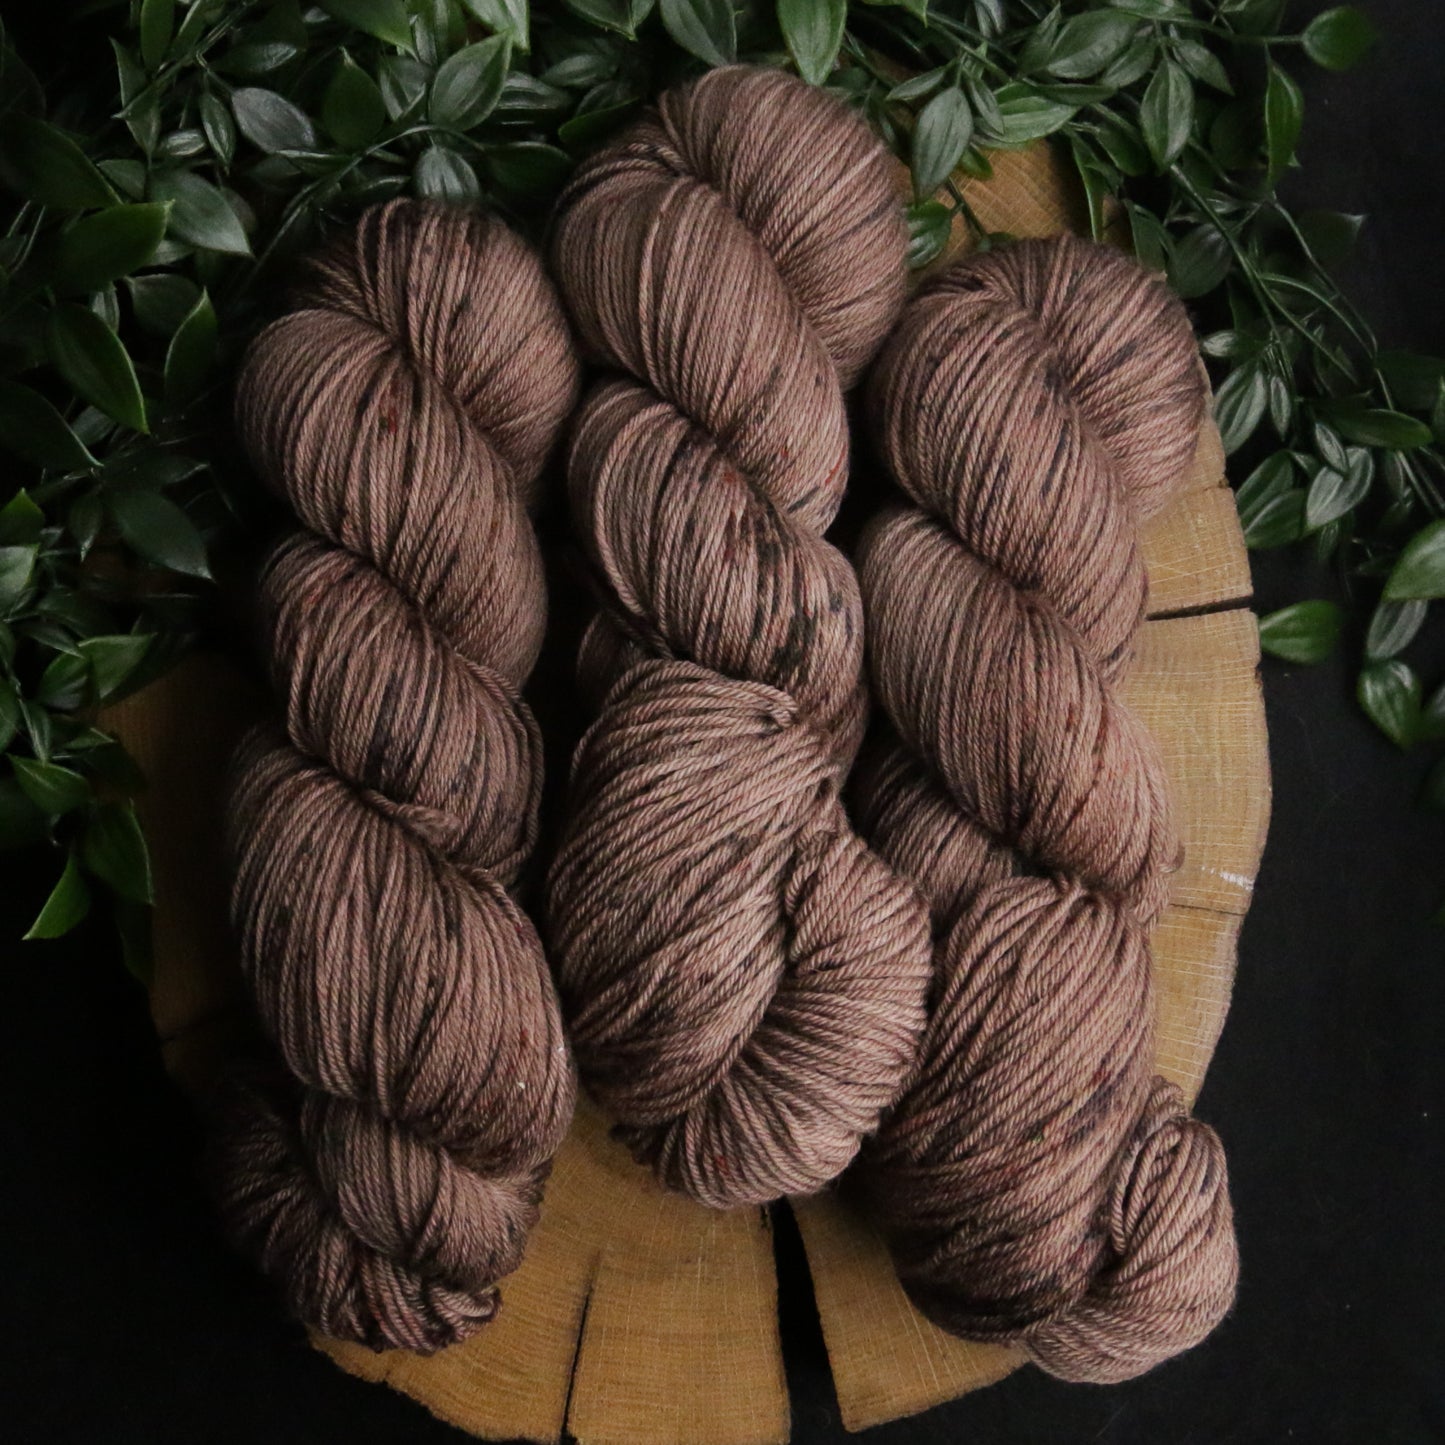 One of a Kind - Classic Merino - Fingering